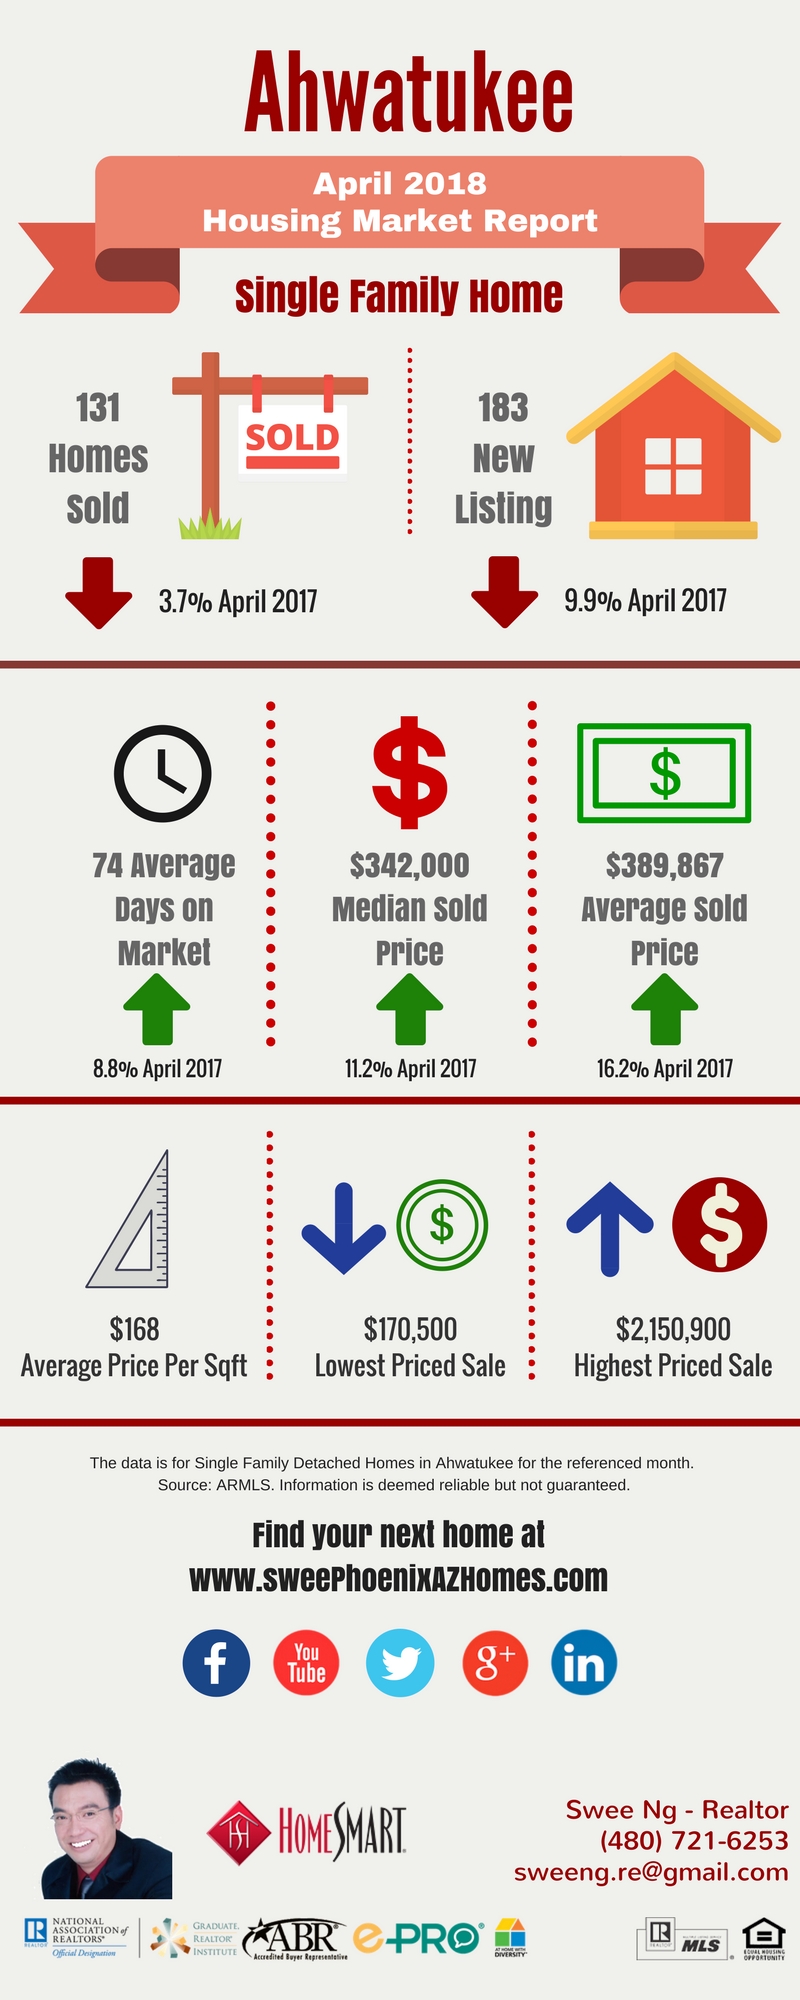 Ahwatukee Housing Market Trends Report April 2018, House Value, Real Estate and Statistic by Swee Ng